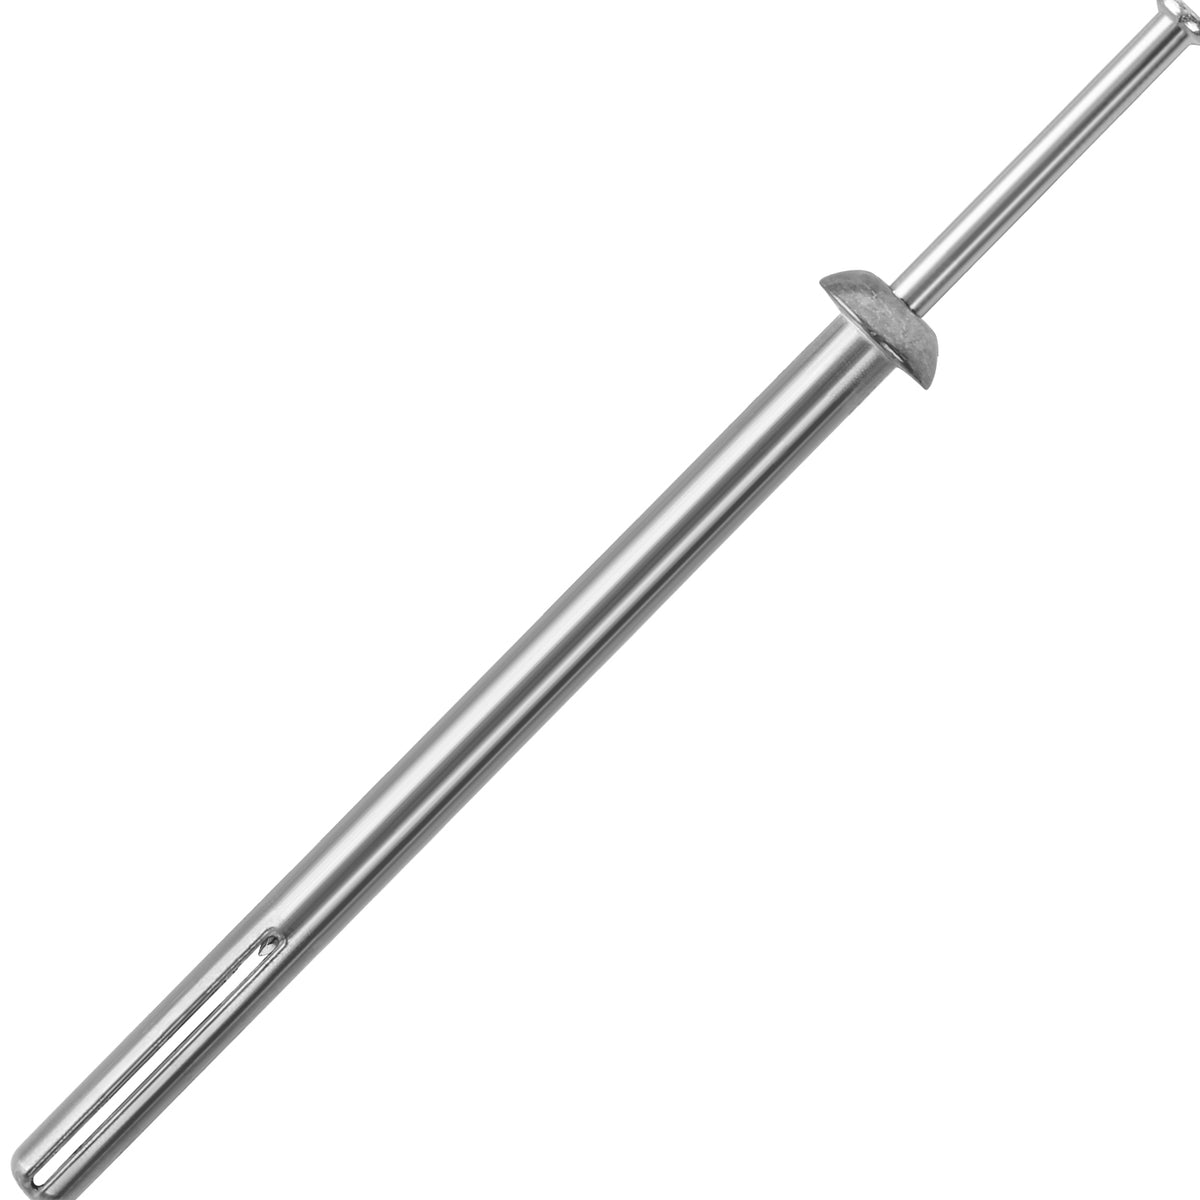 meite 1/4" Diameter Hammer Drive Anchors with Galvanized Steel Nails Set - MEITE USA